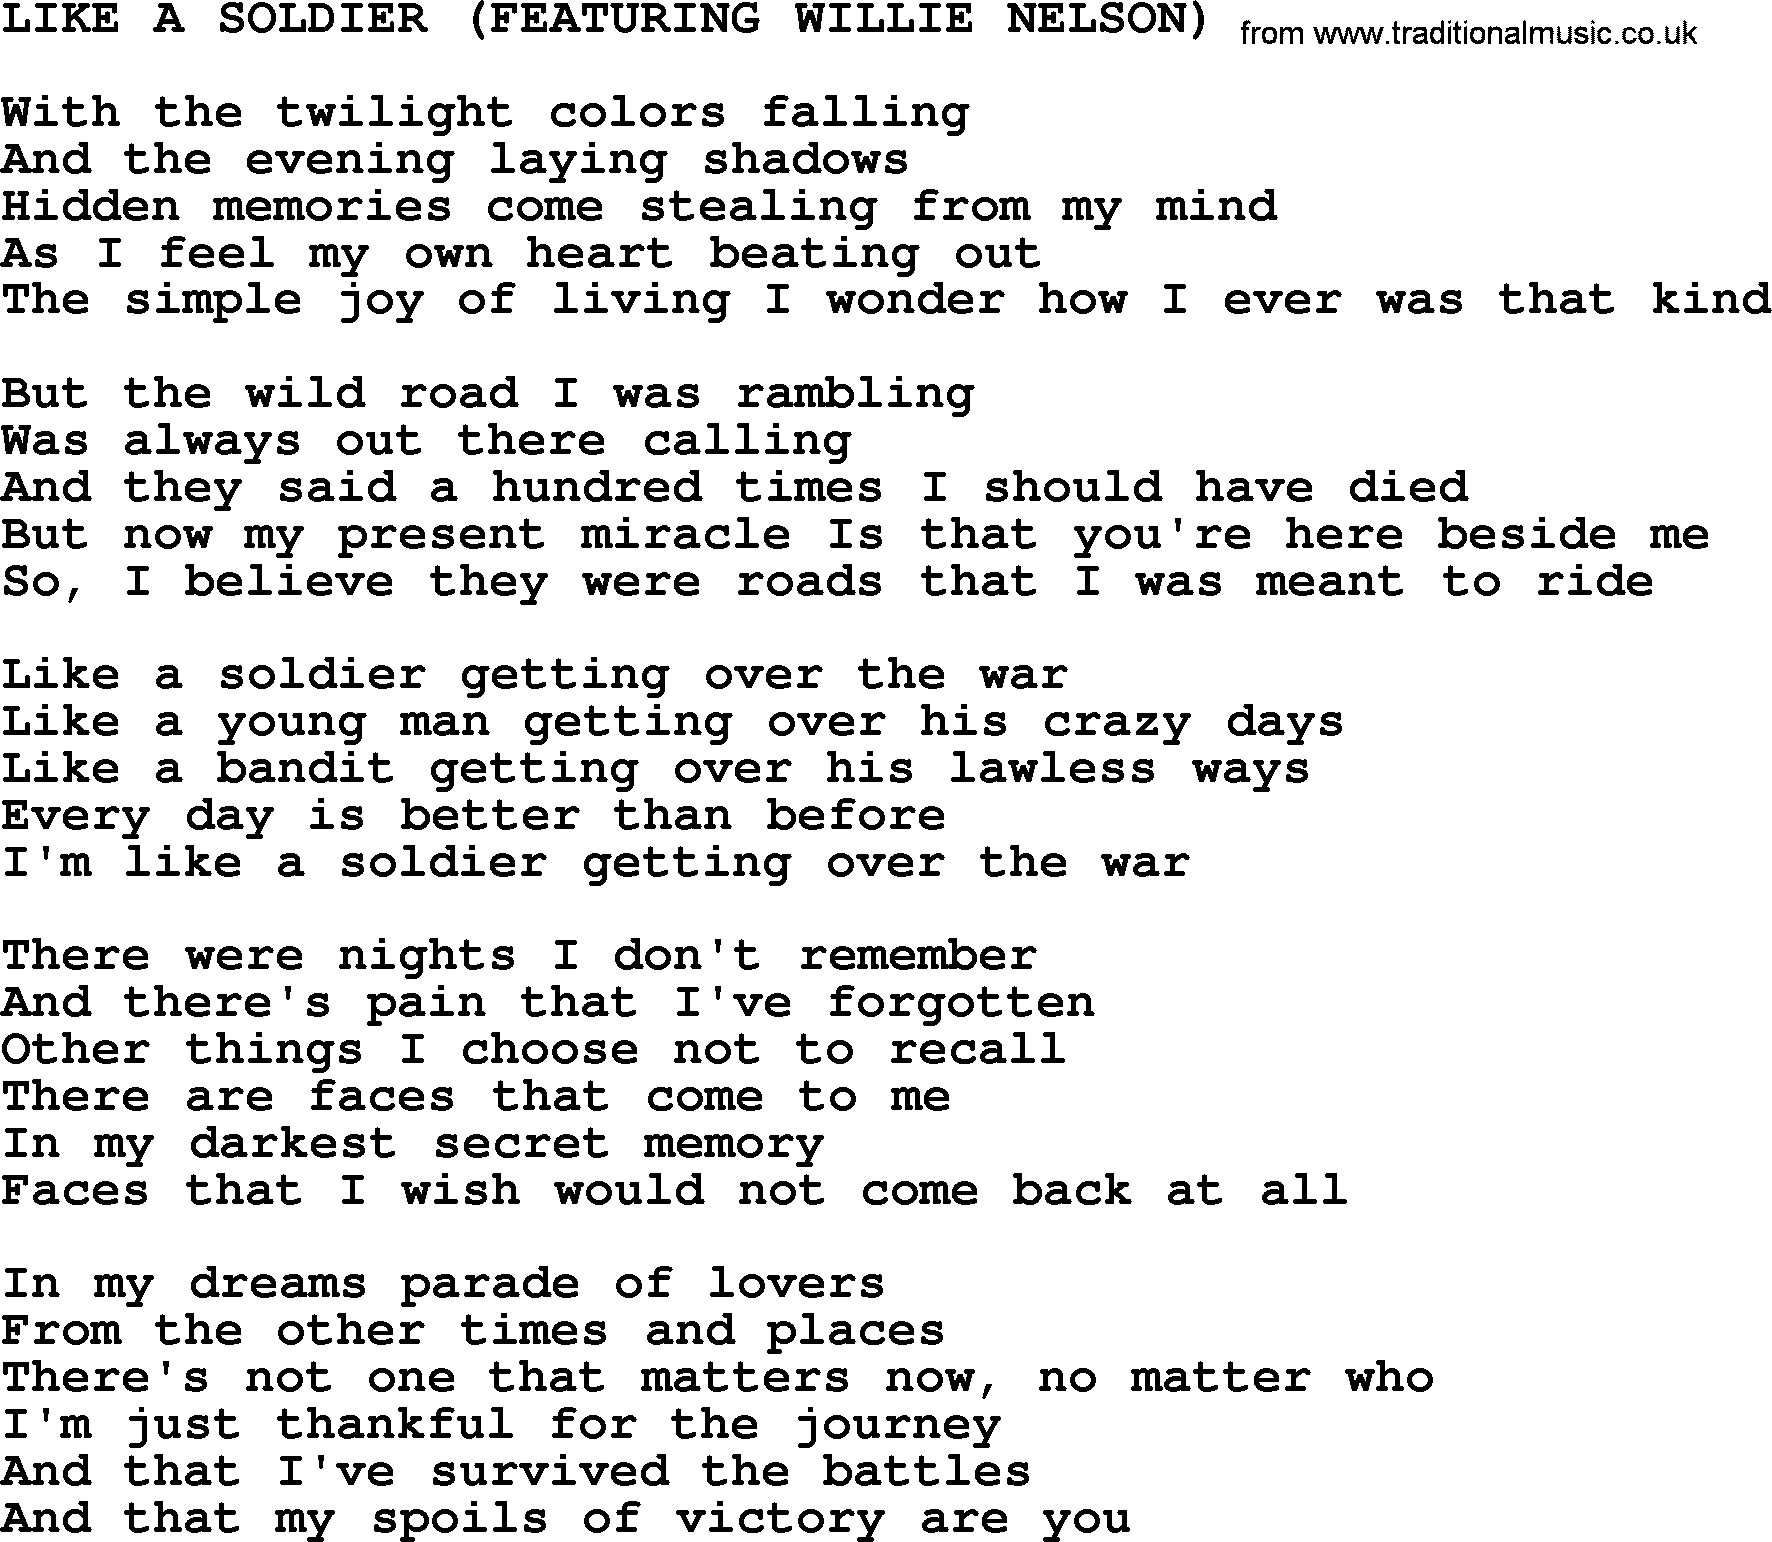 Johnny Cash song: Like A Soldier (Featuring Willie Nelson), lyrics